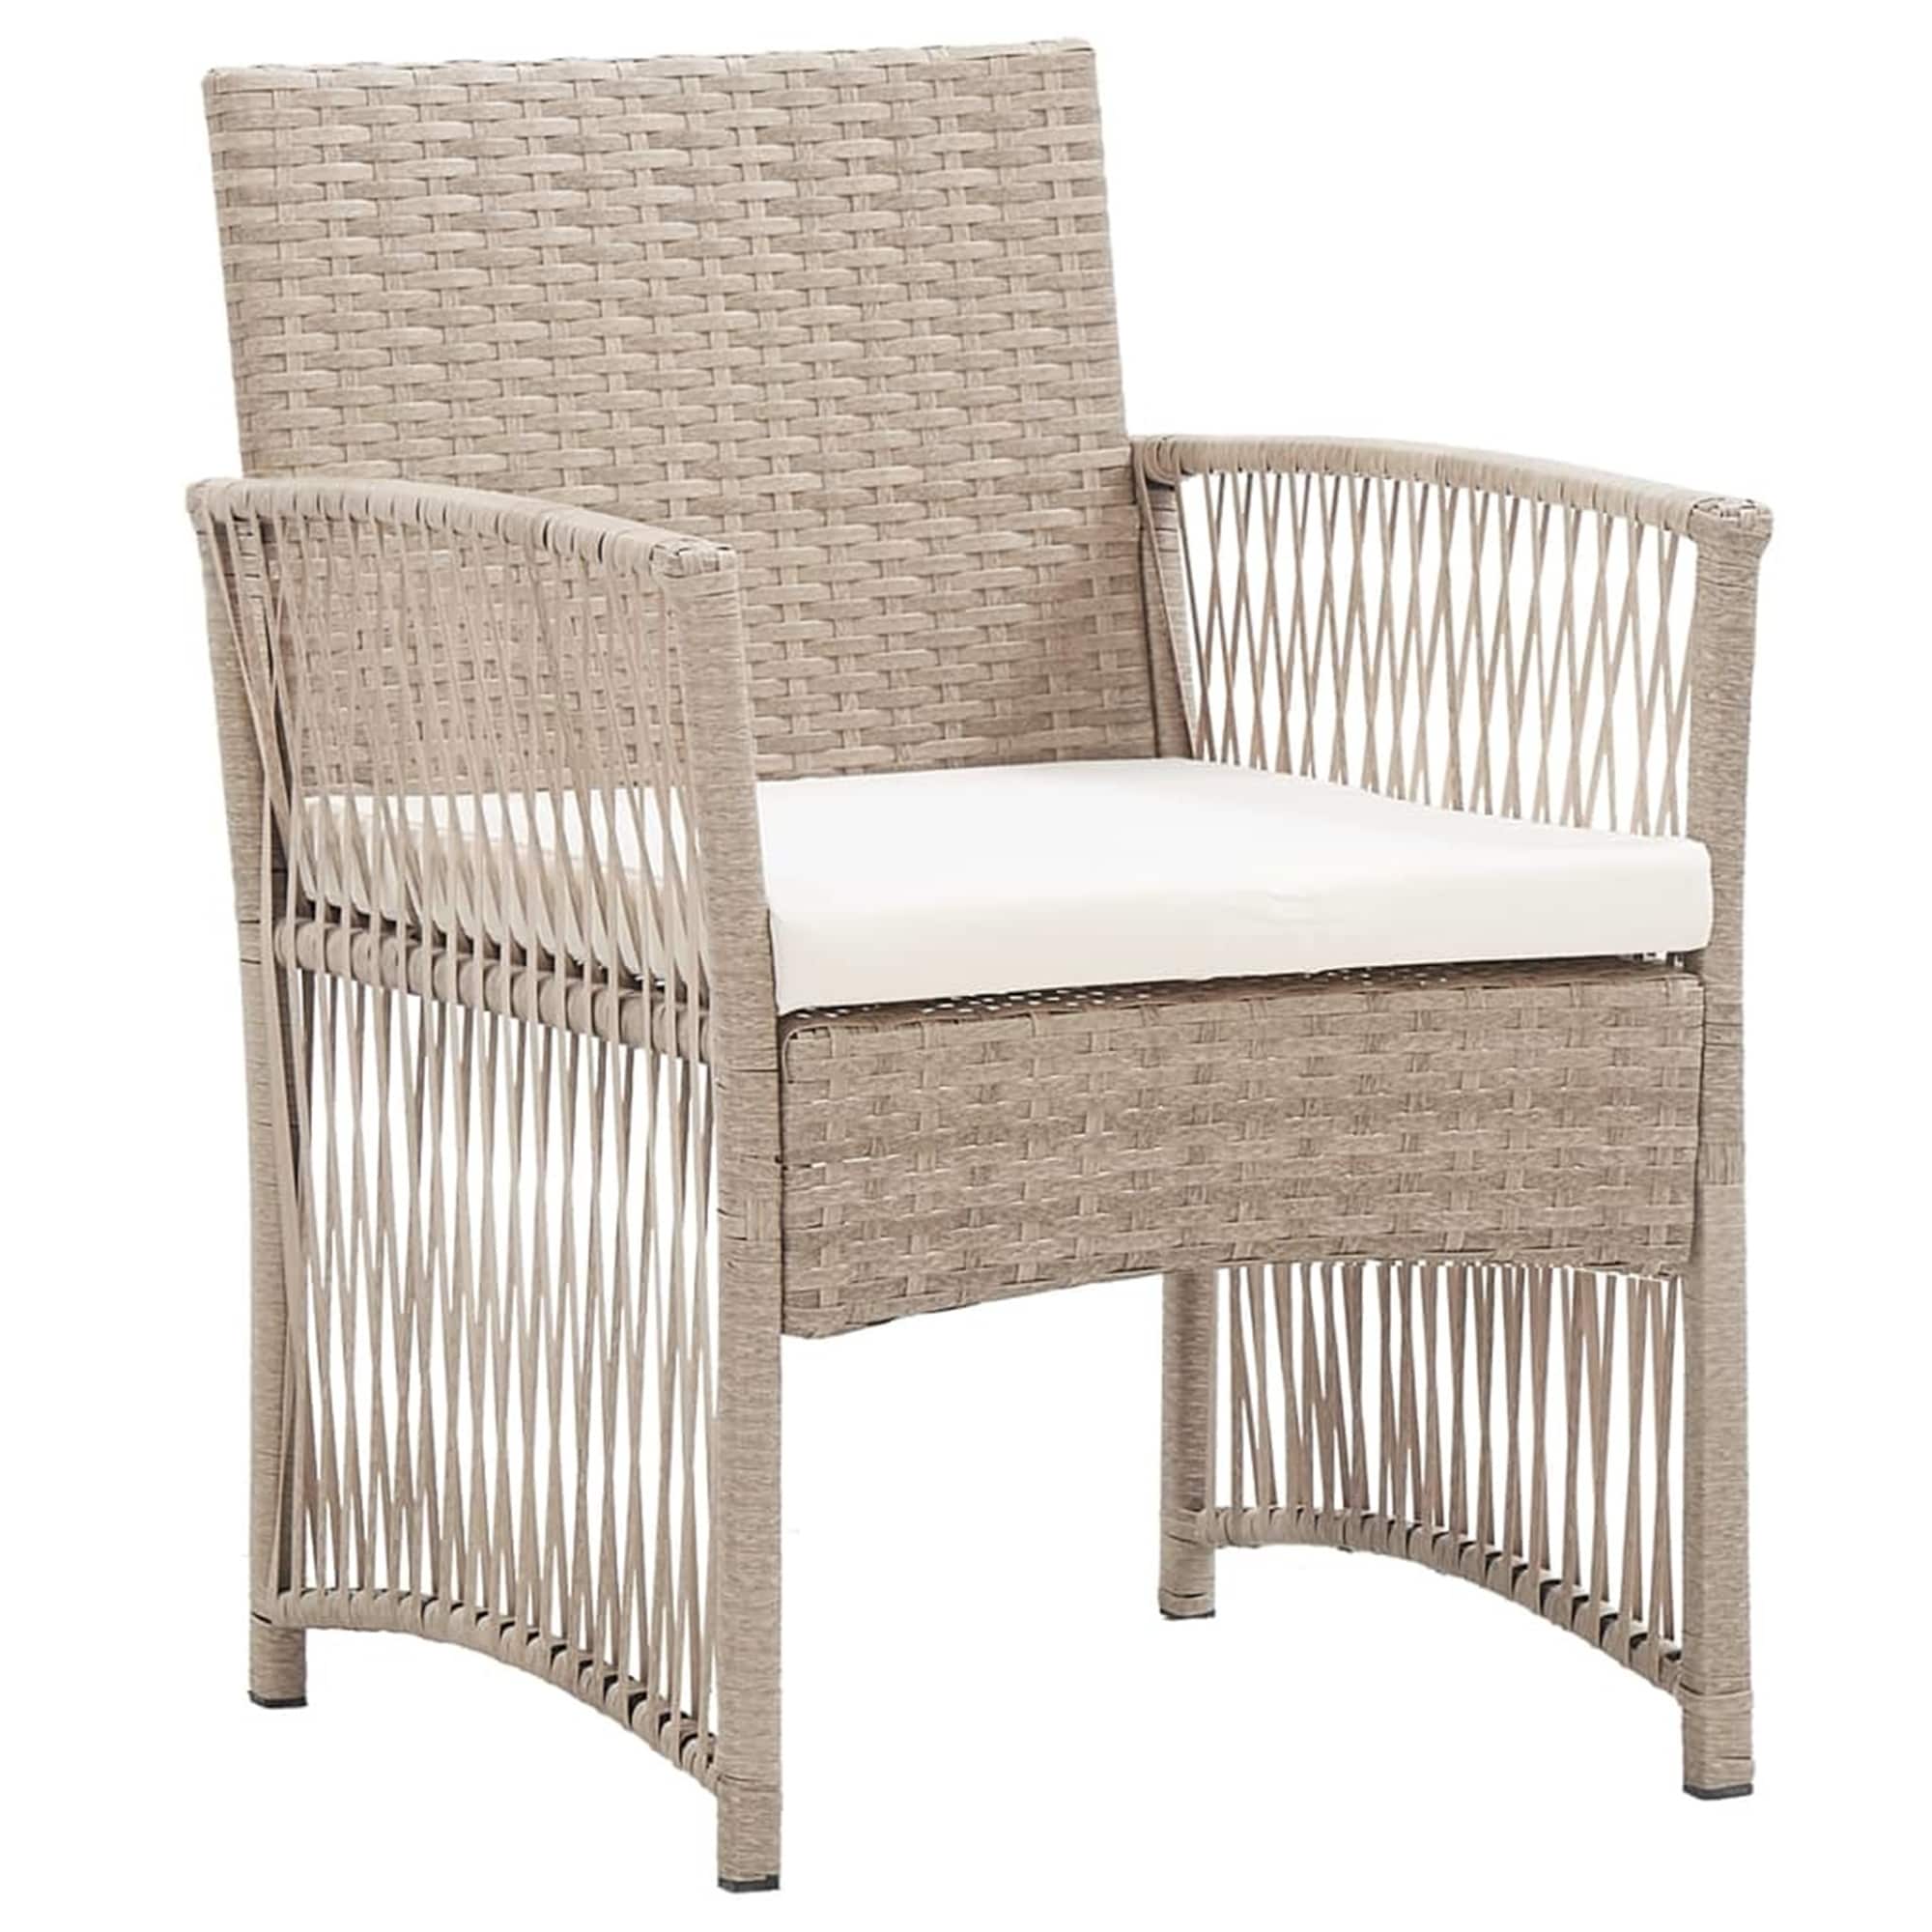 2 Pcs Patio Chairs With Cushions Rattan Garden Armchairs All-weather